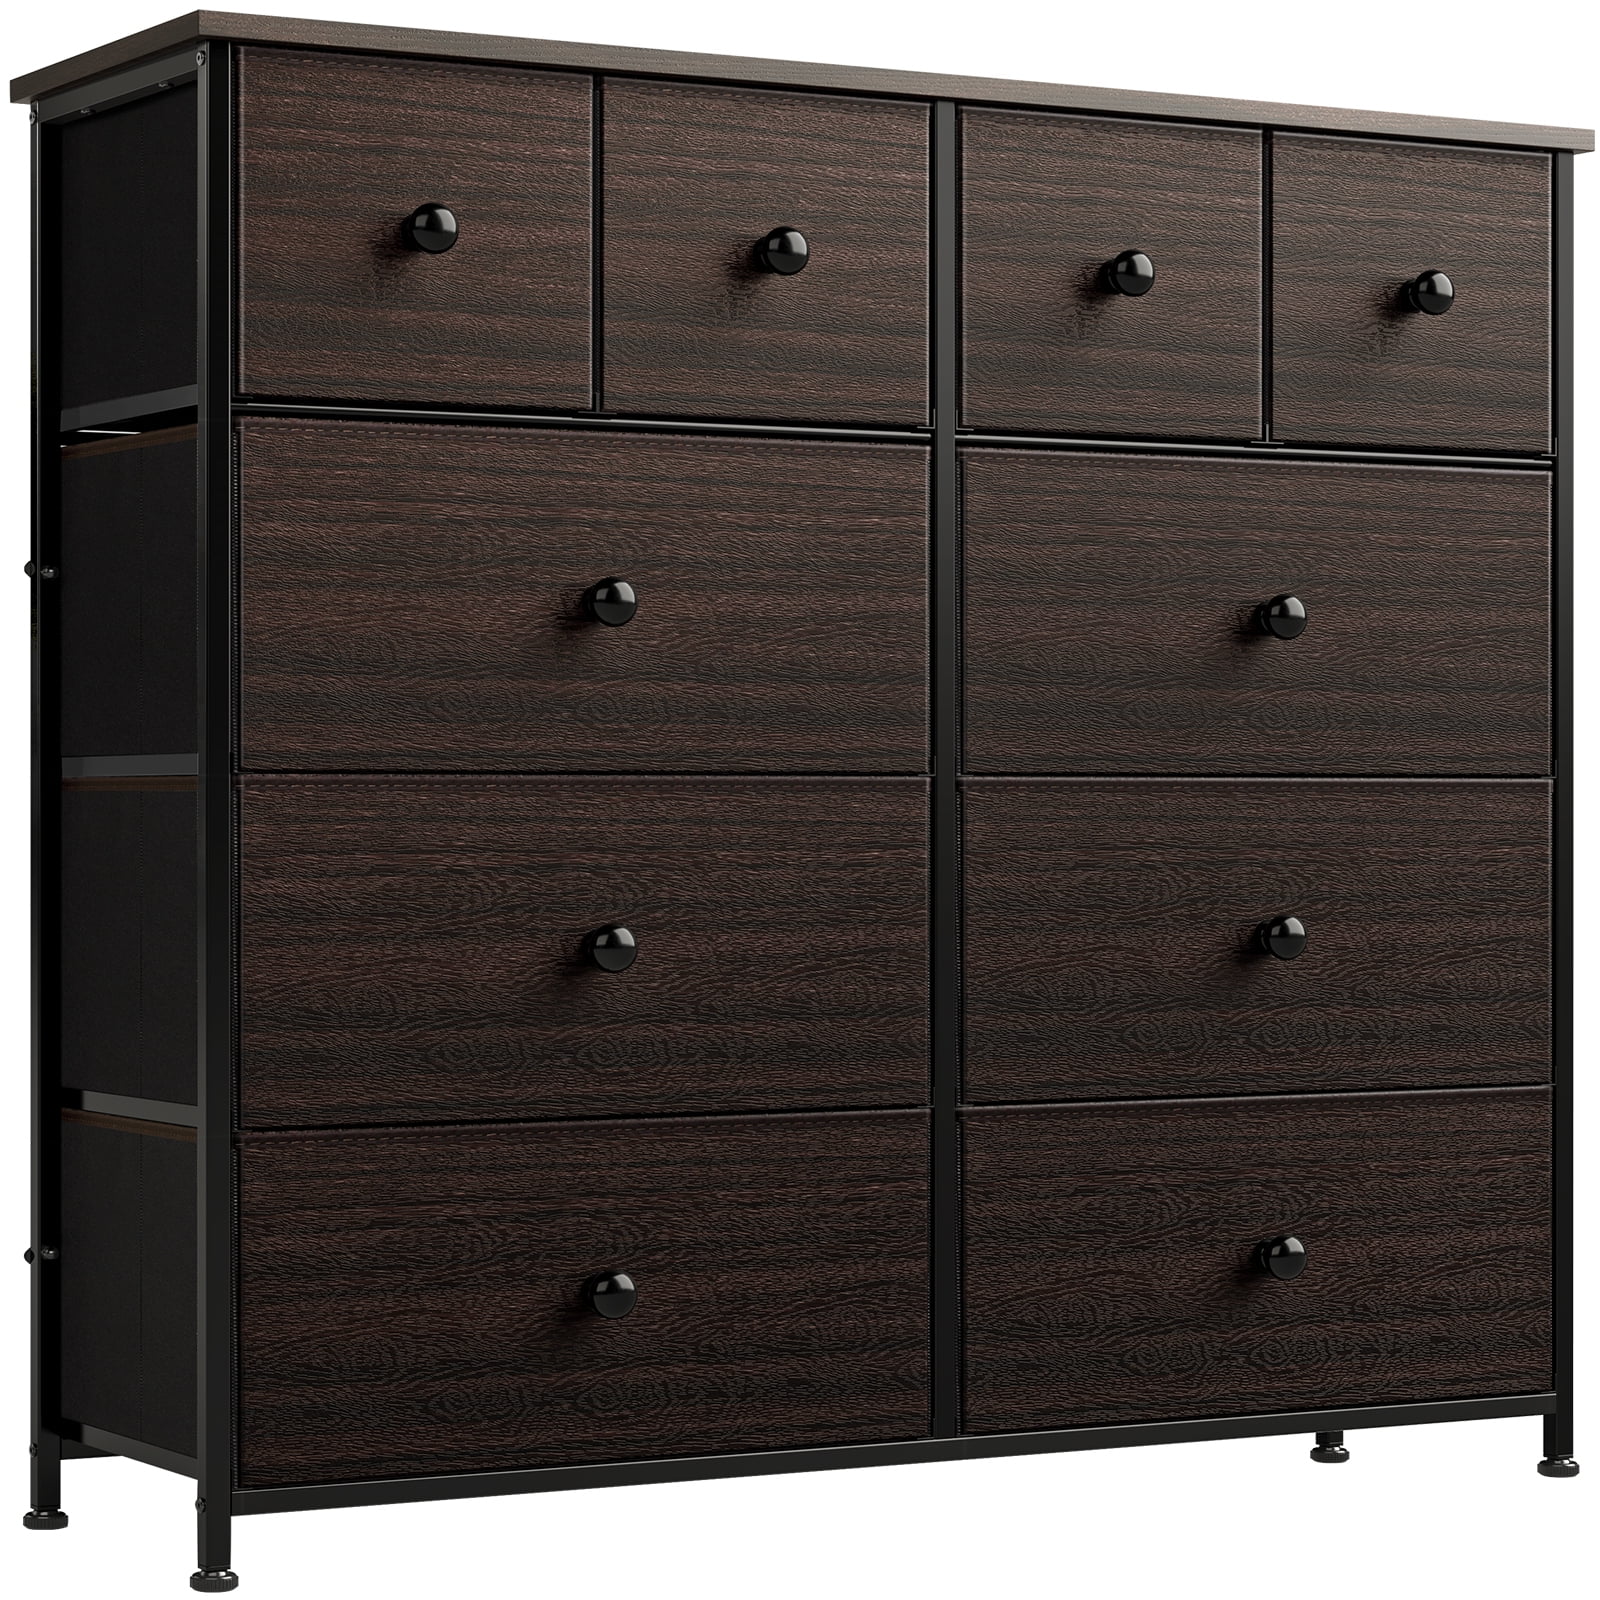 Deals on REAHOME Dressers for Bedroom with 10 Drawer Fabric Chest